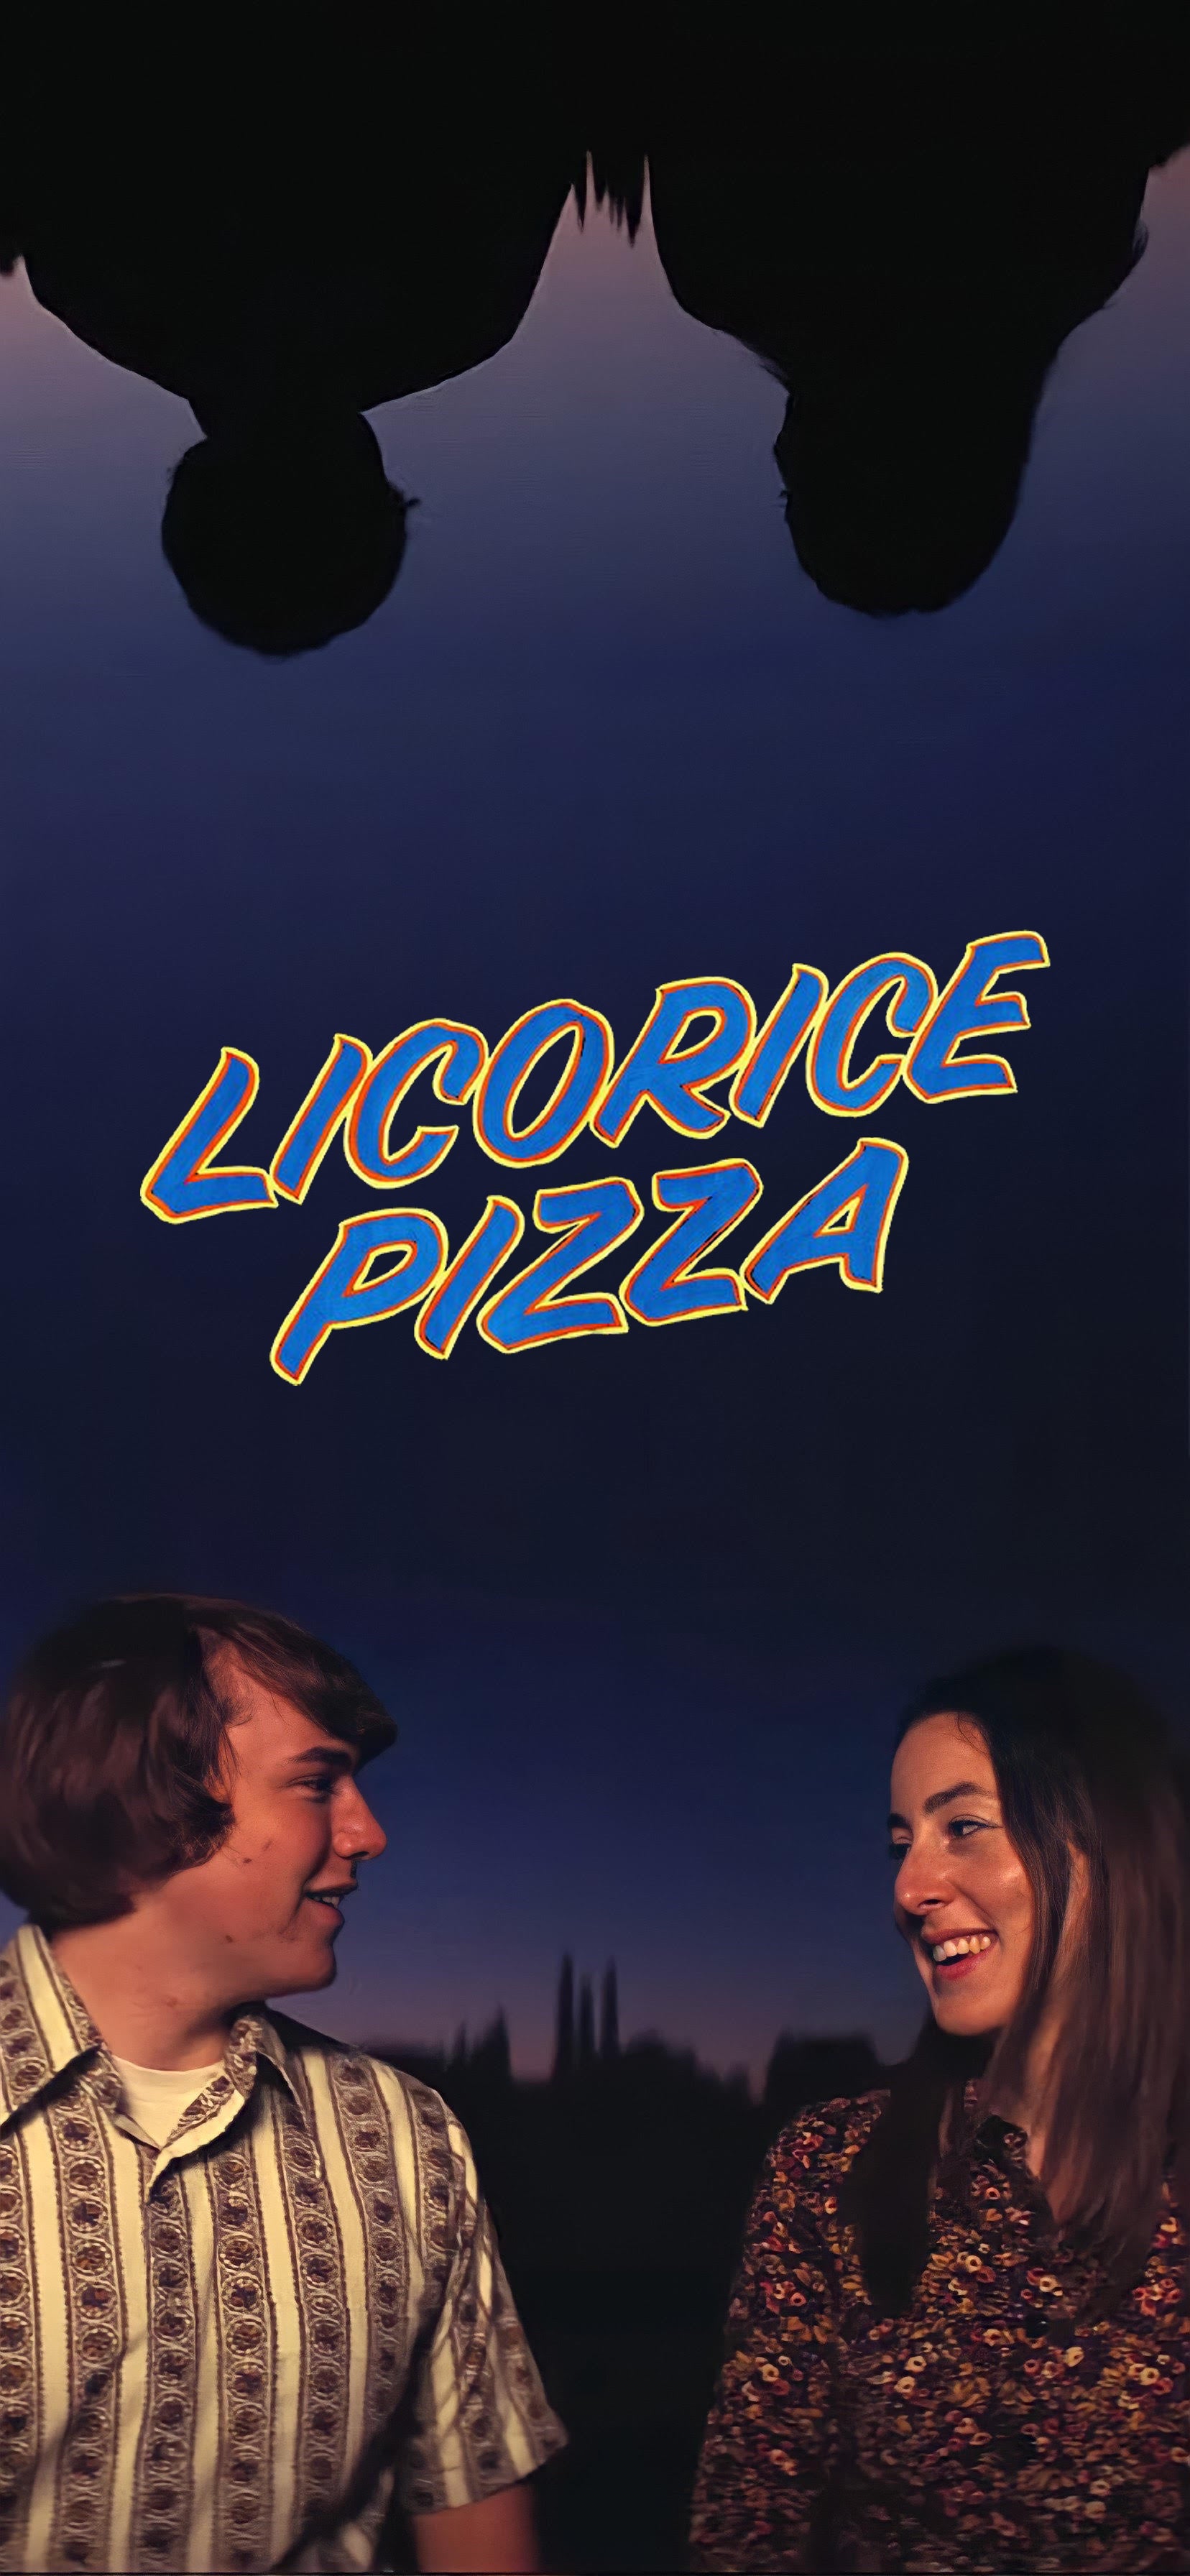 Created a Licorice Pizza phone wallpaper for myself, figured I'd share it here for you guys!